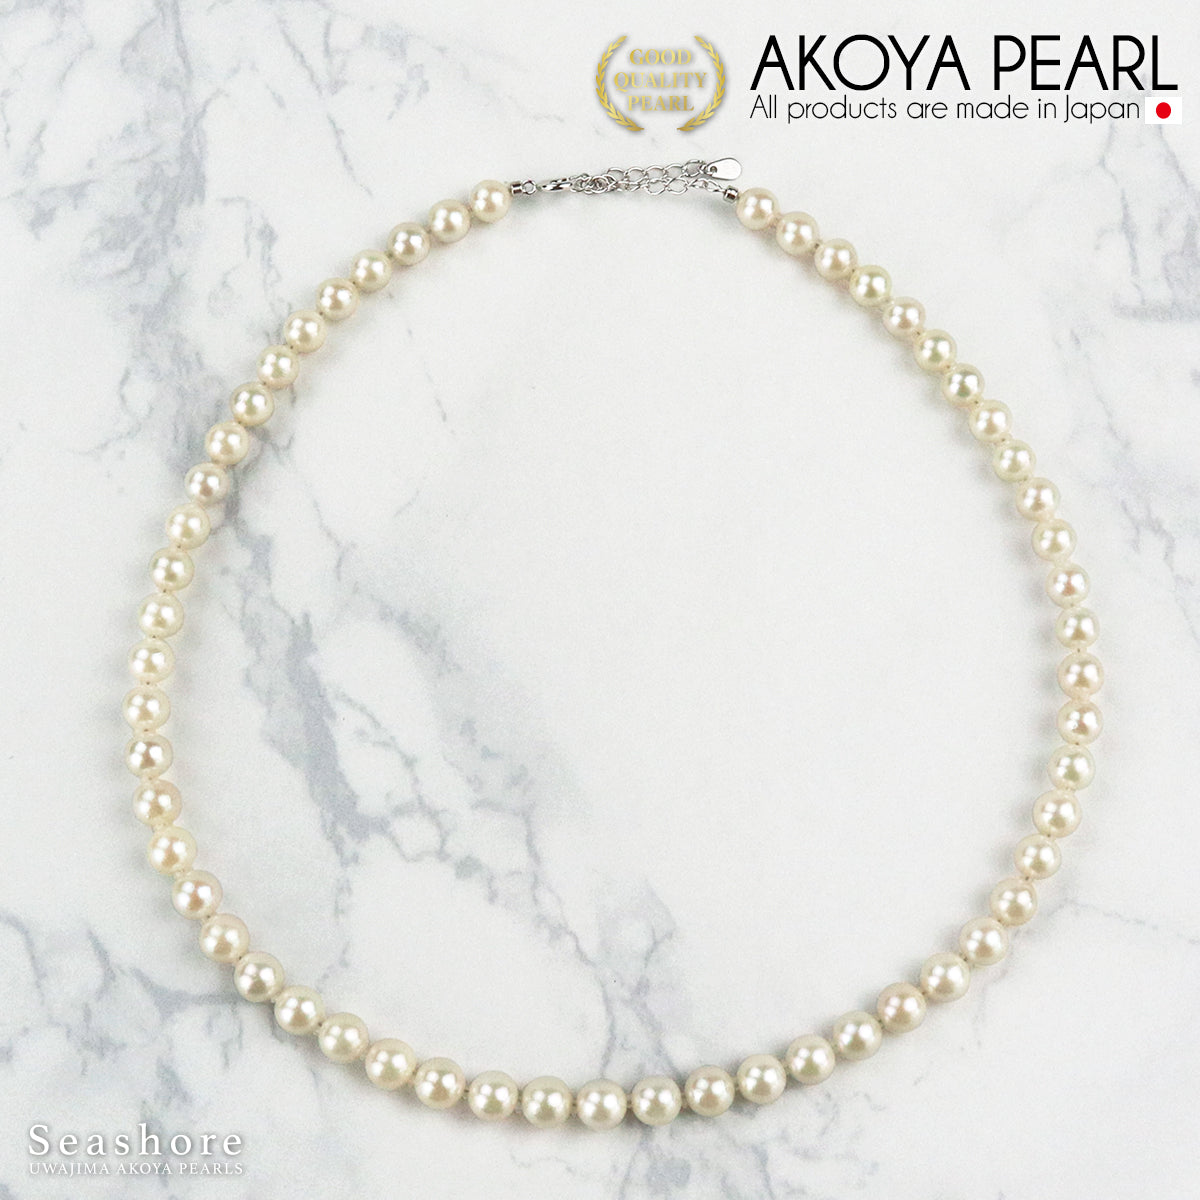 Akoya pearl necklace 1 strand [6.5-7.0mm] SV925 with adjuster, identification certificate, cardboard case (4031)